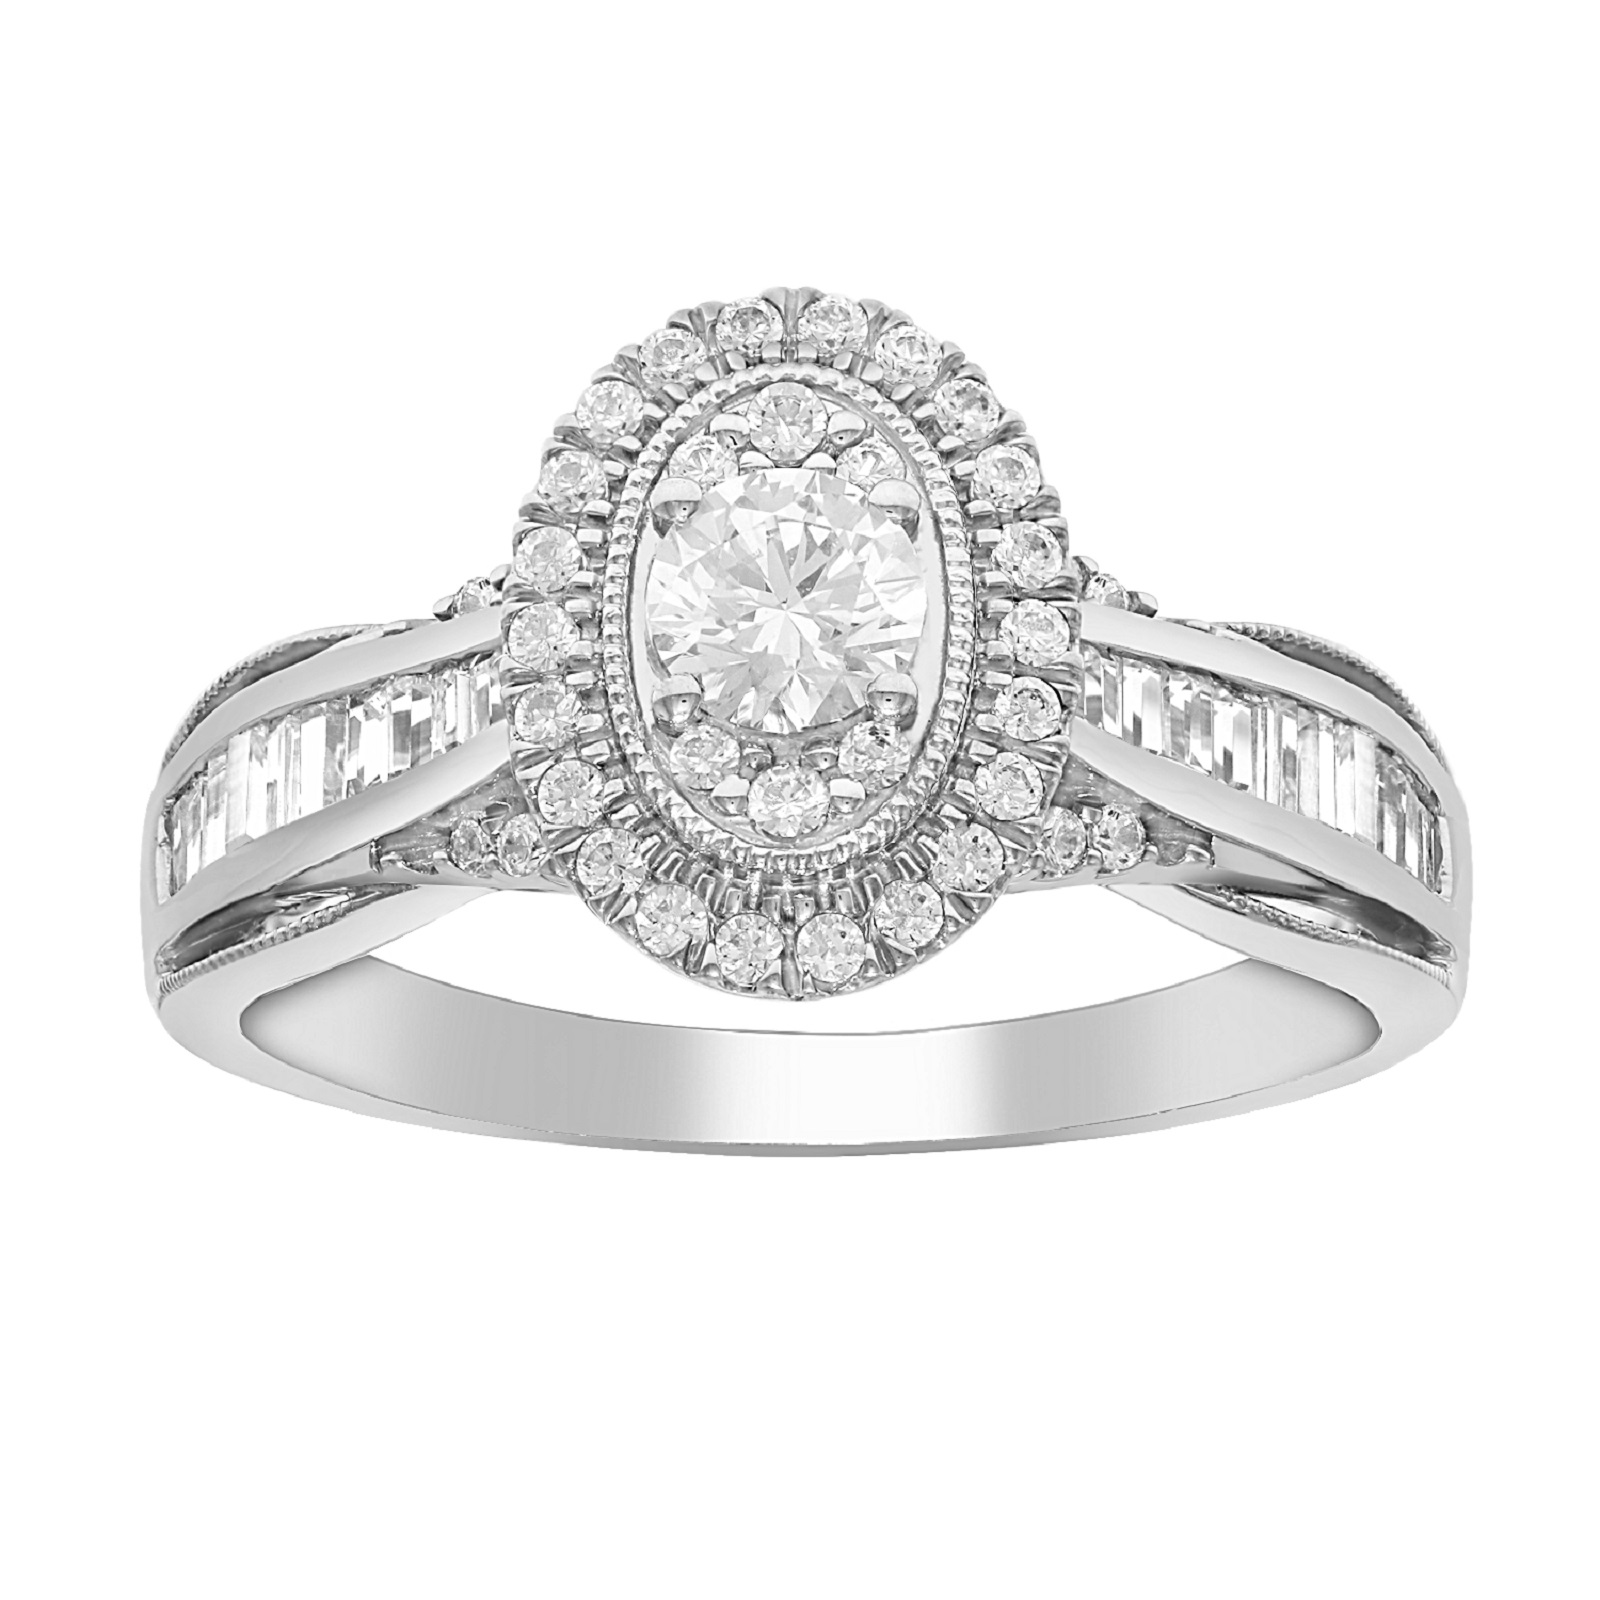 10K White Gold 0.75CTTW Certified Diamond Oval Engagement Ring - Size 7 Only